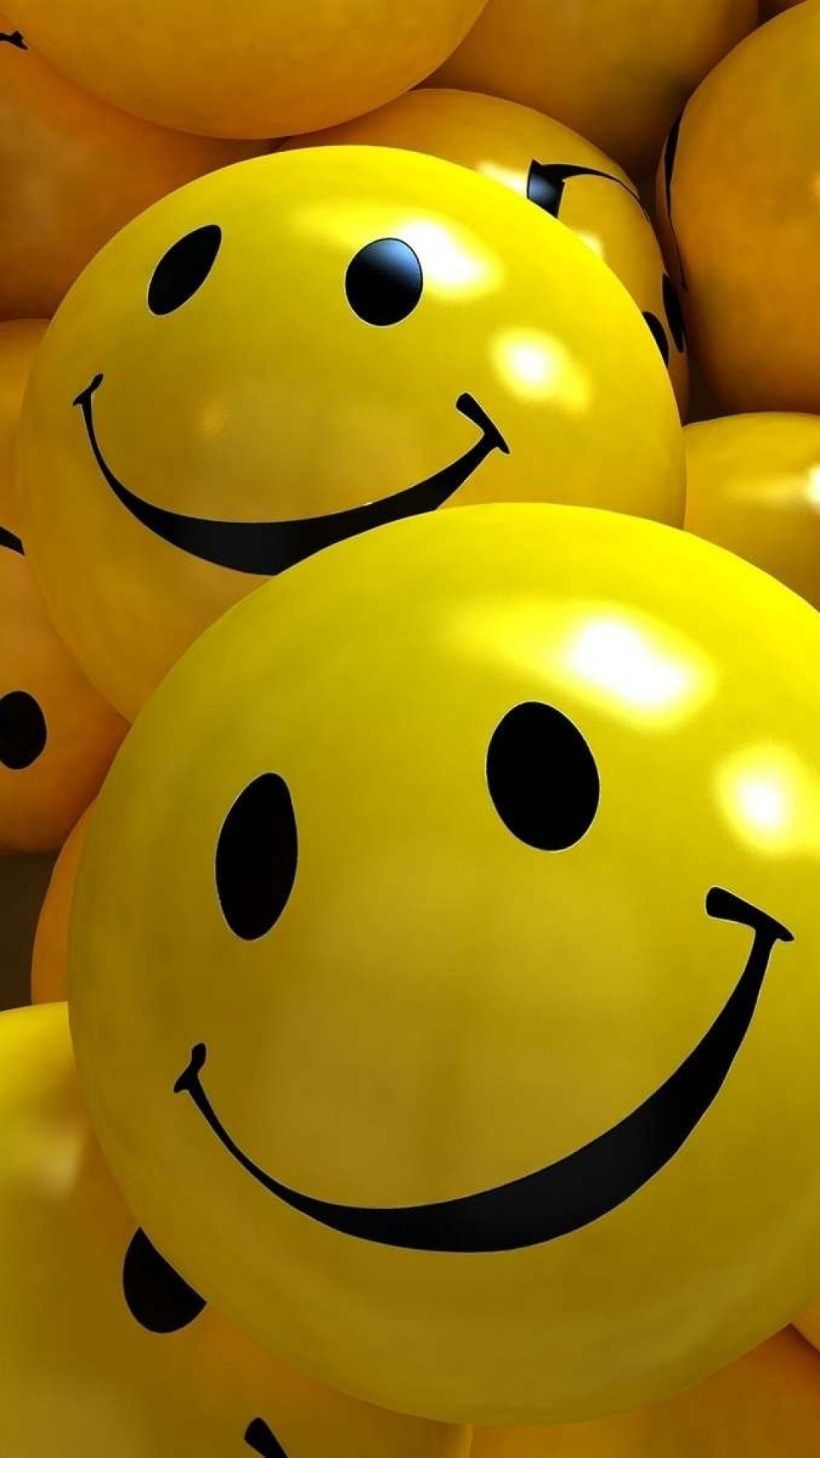 Smiley HD Wallpaper For Mobile Image Smileys In